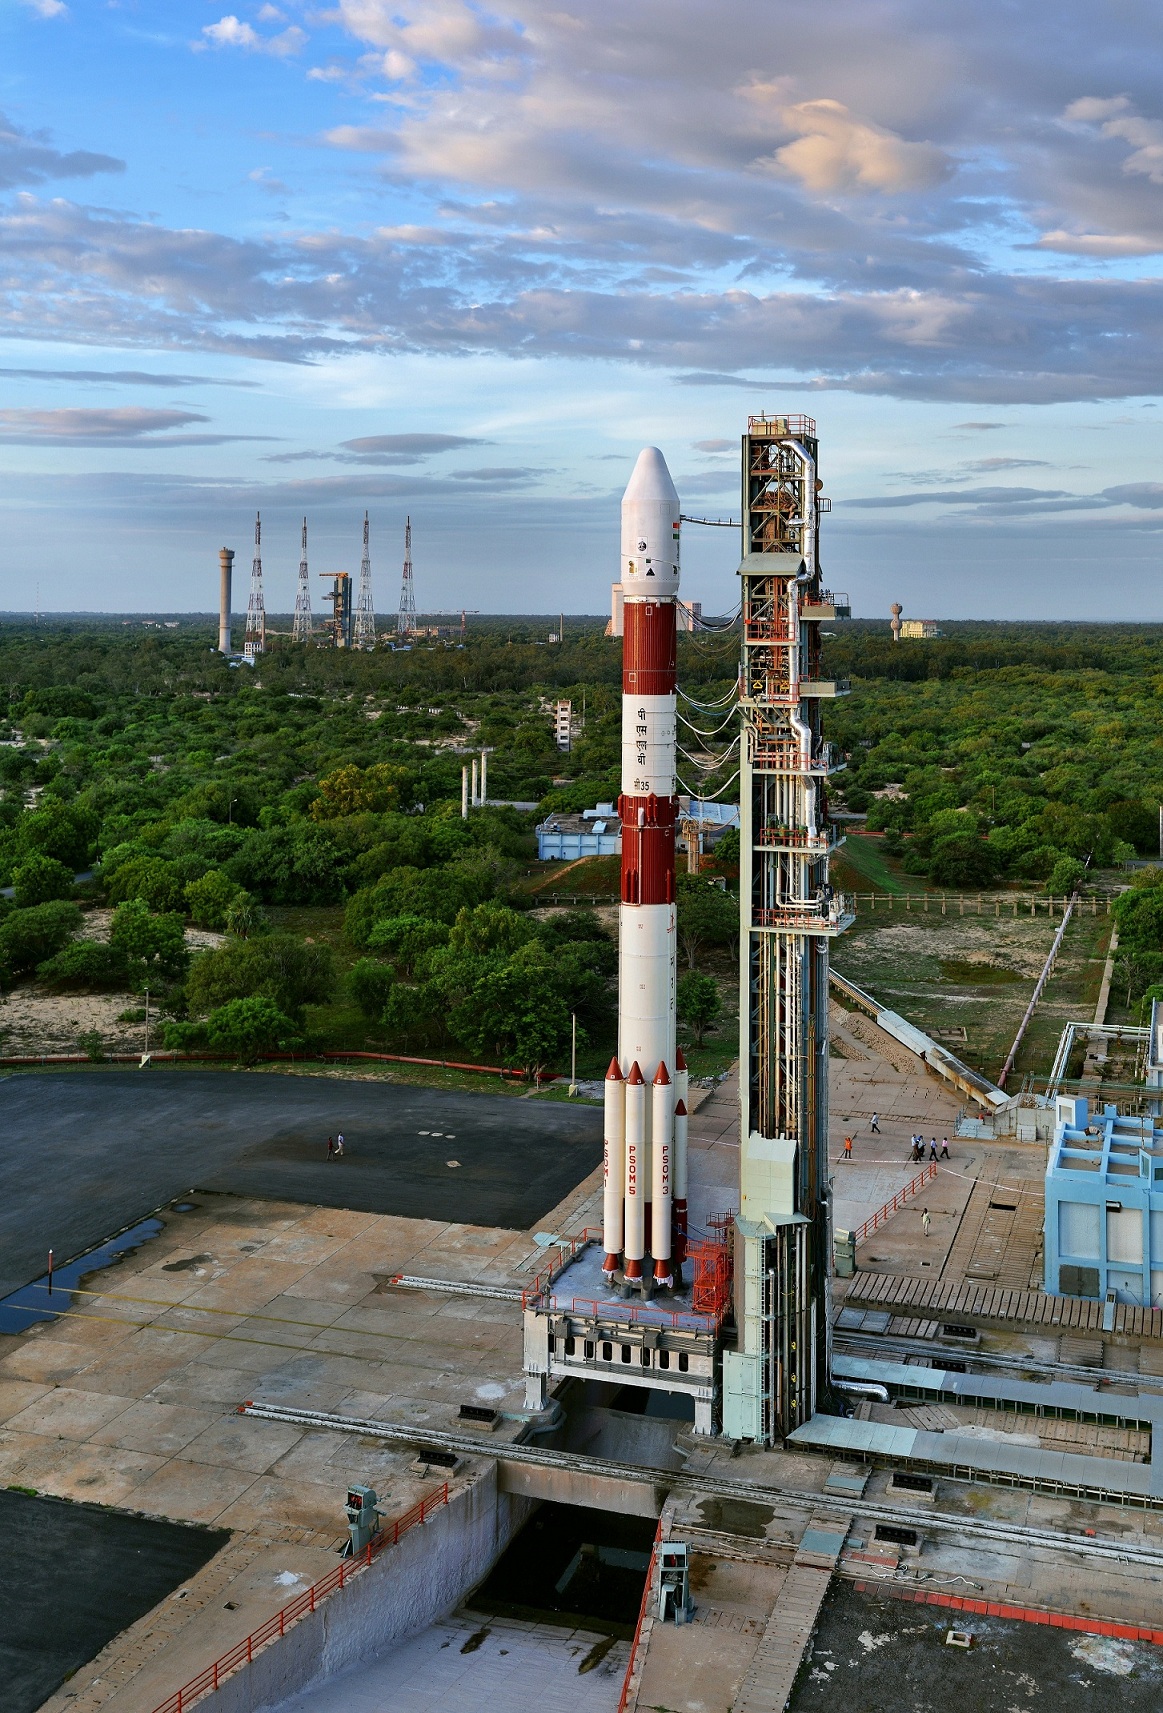 4_pslv-c35_on_first_launch_pad